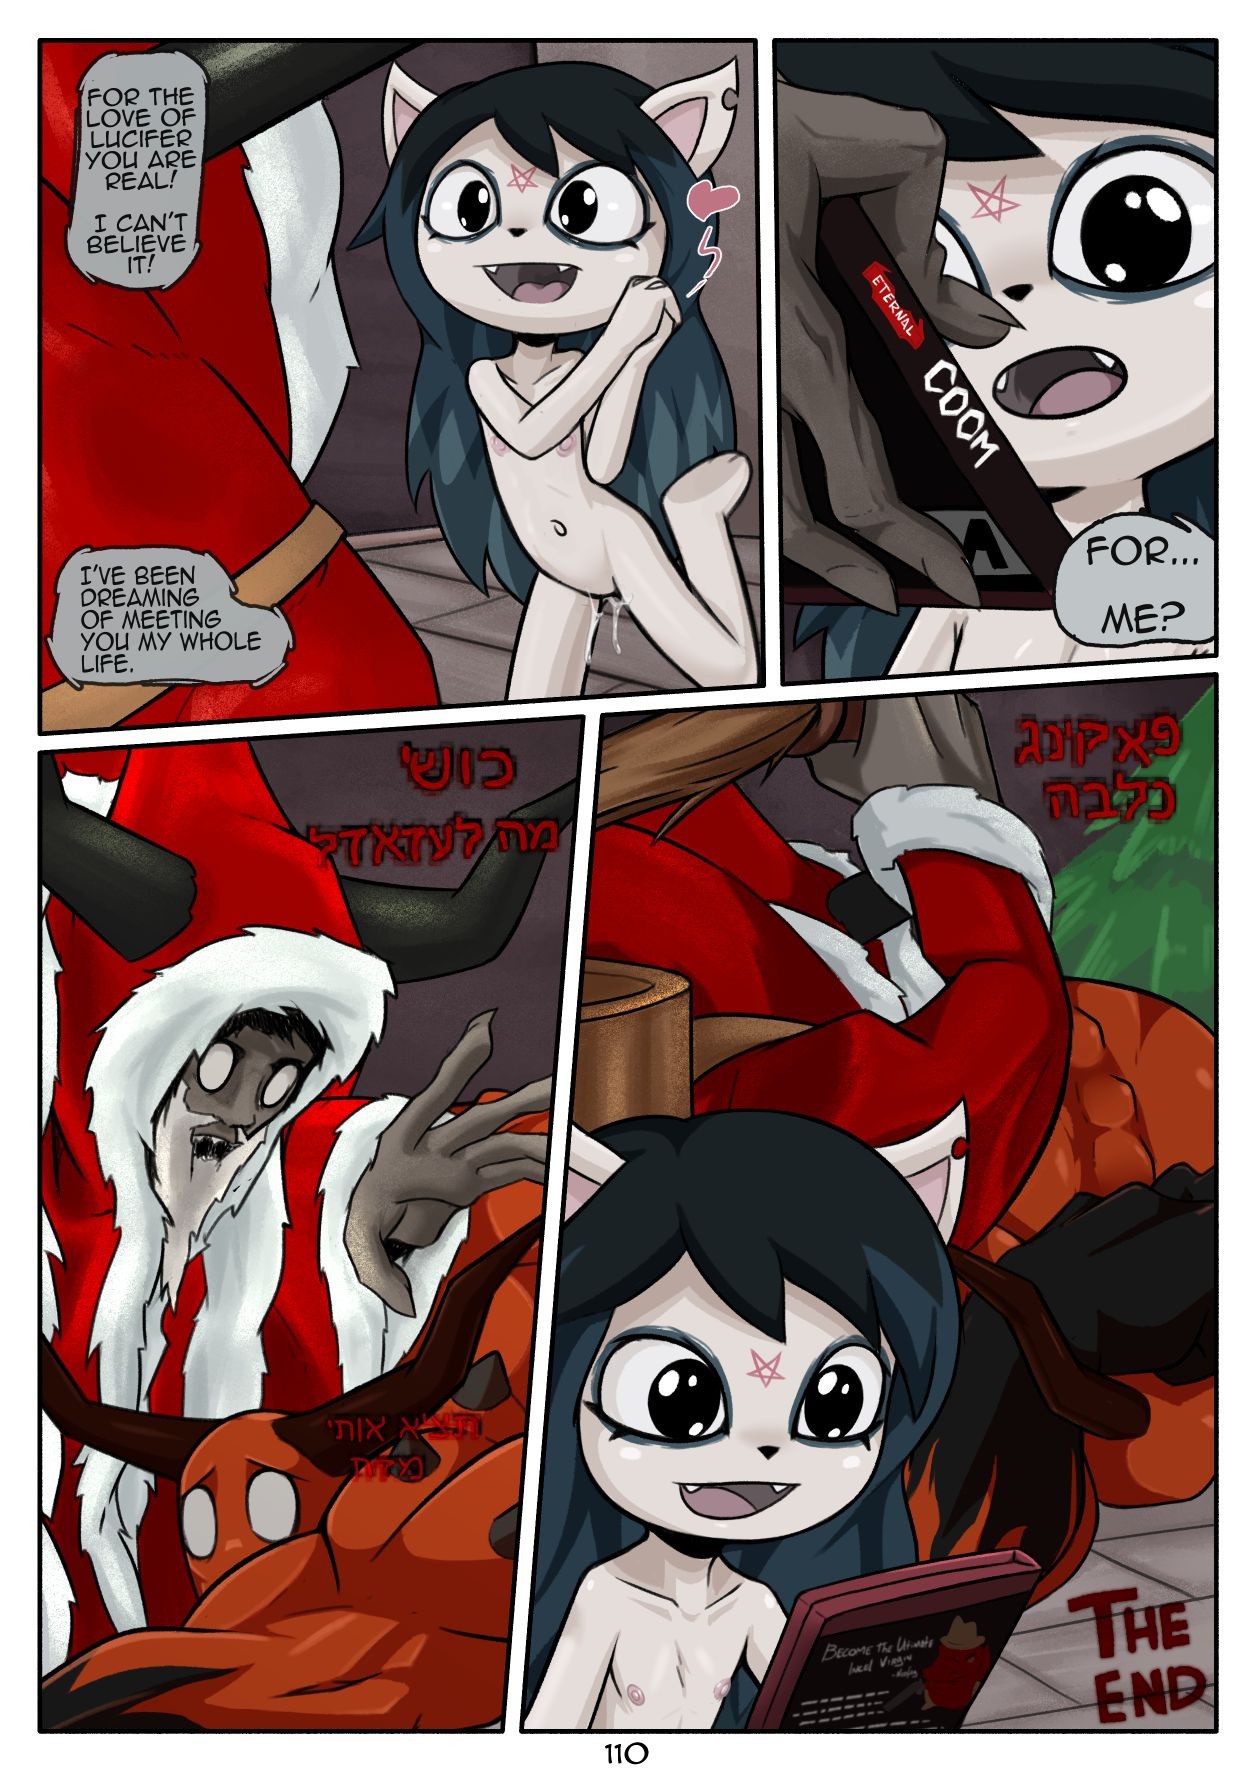 The Offering - N3f porn comic picture 15